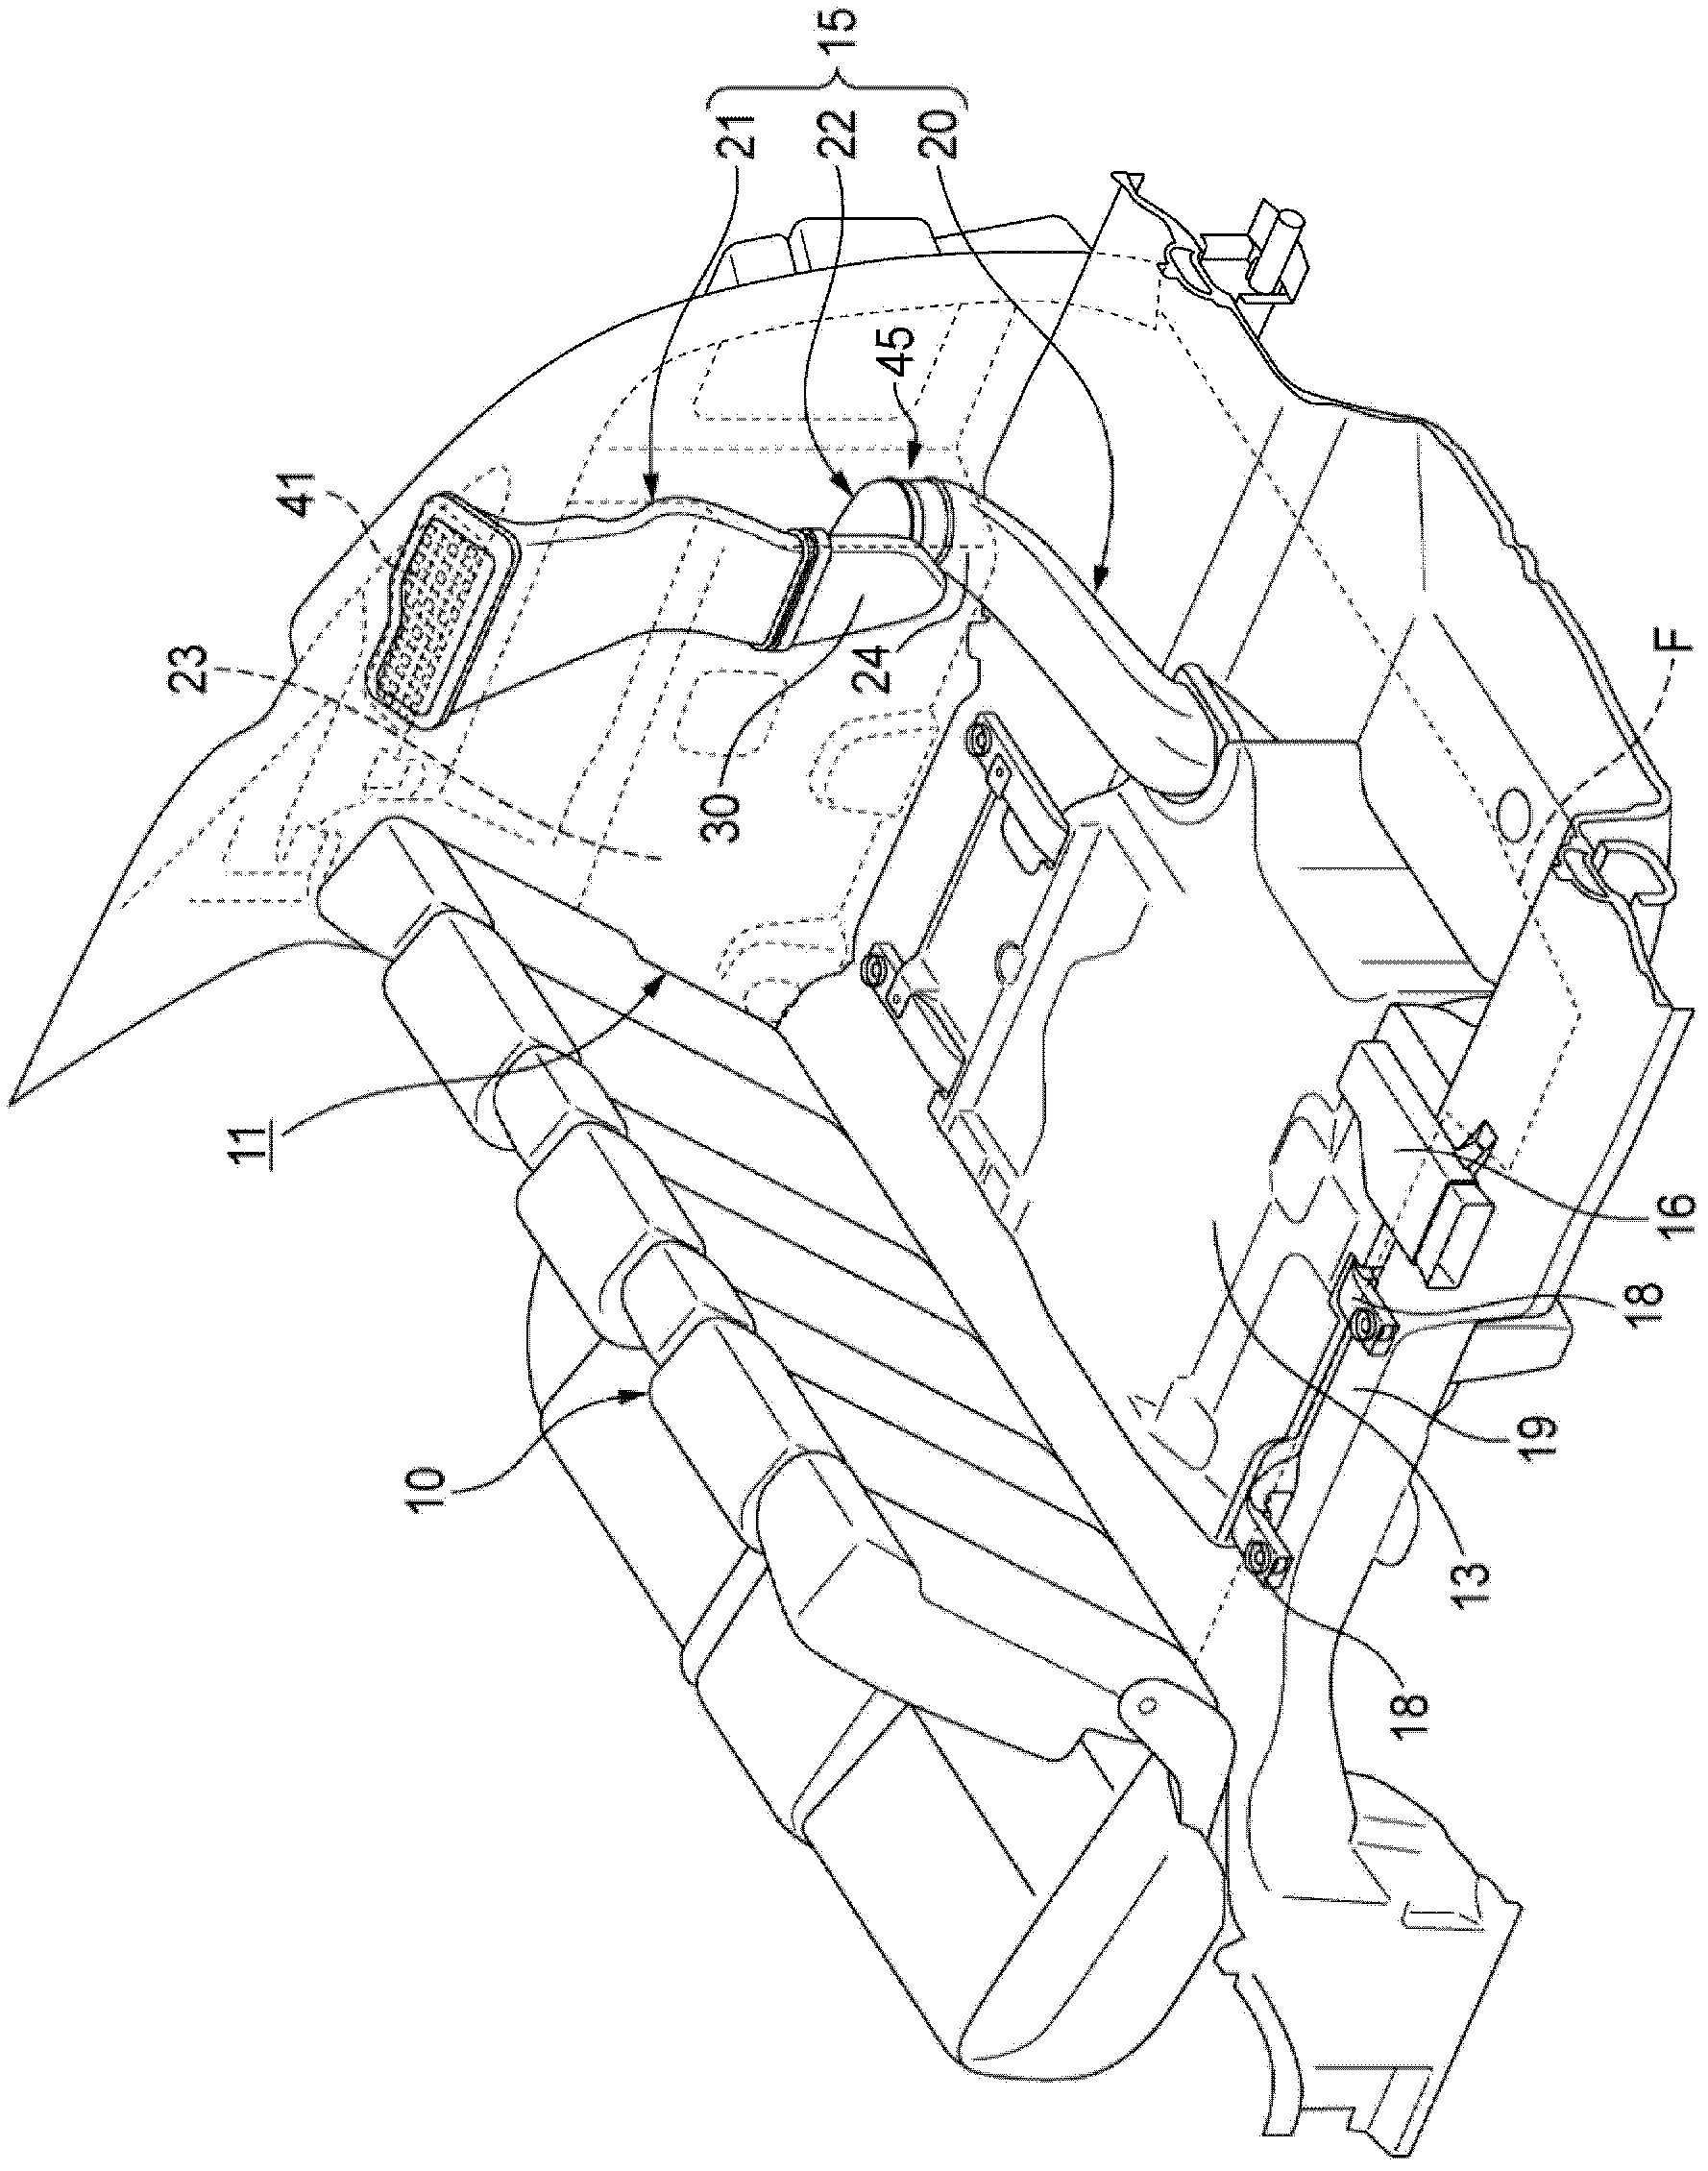 Cooling mechanism of vehicle battery